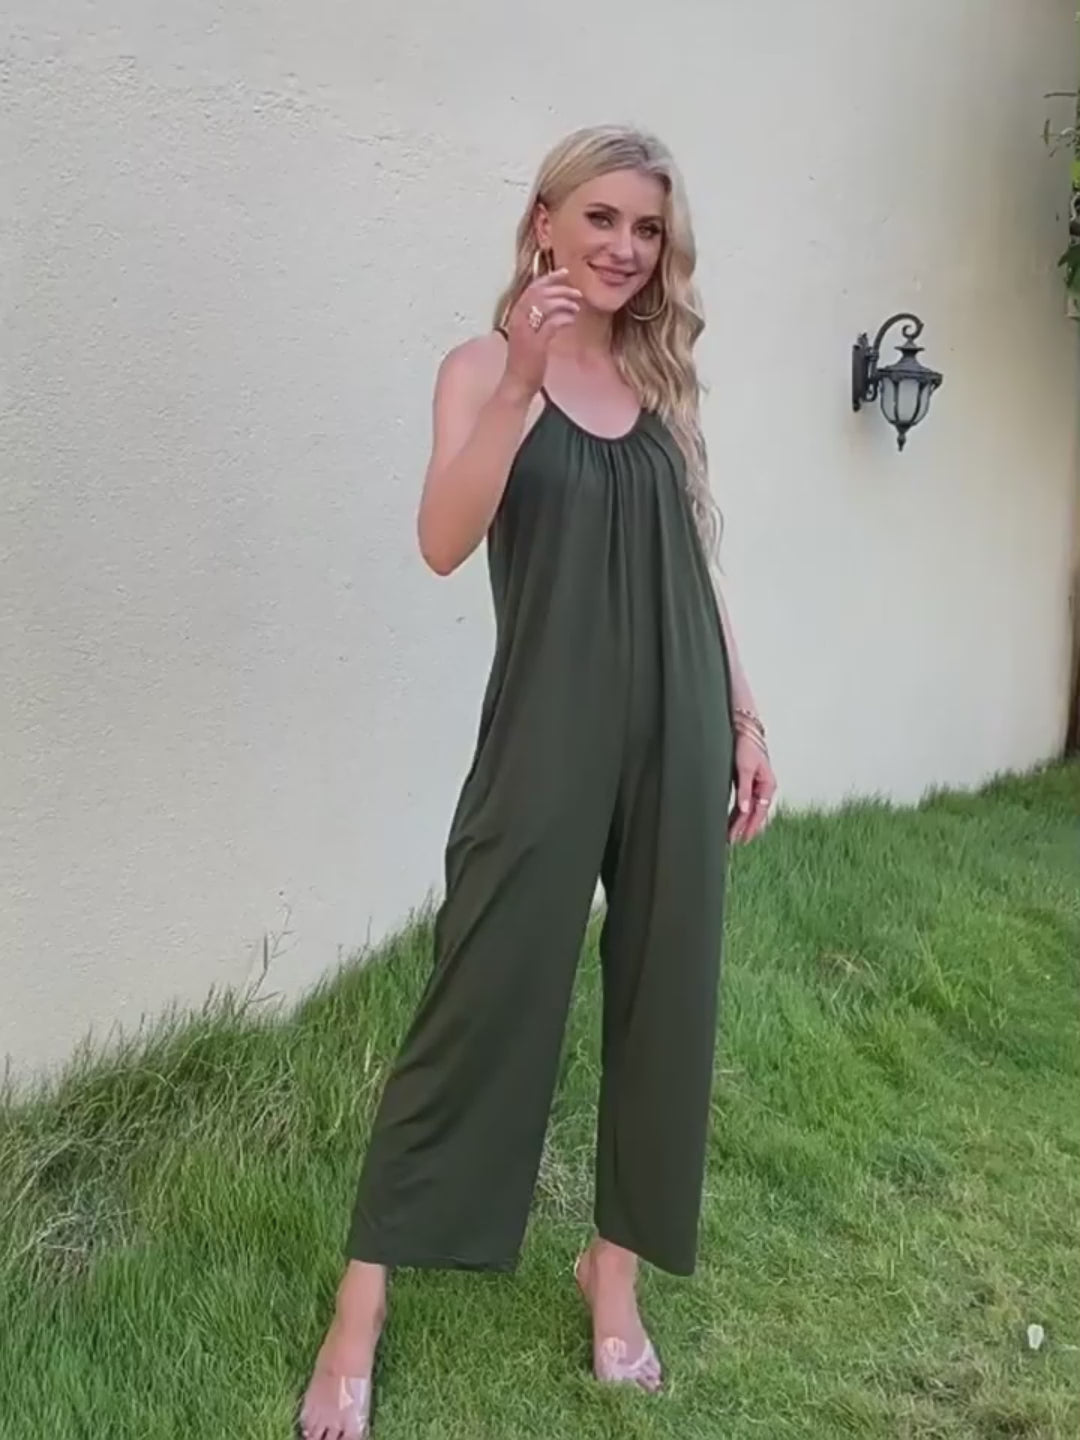 Women's Loose Sleeveless Jumpsuits Romper Jumpsuit With Pockets Long Pant Summer